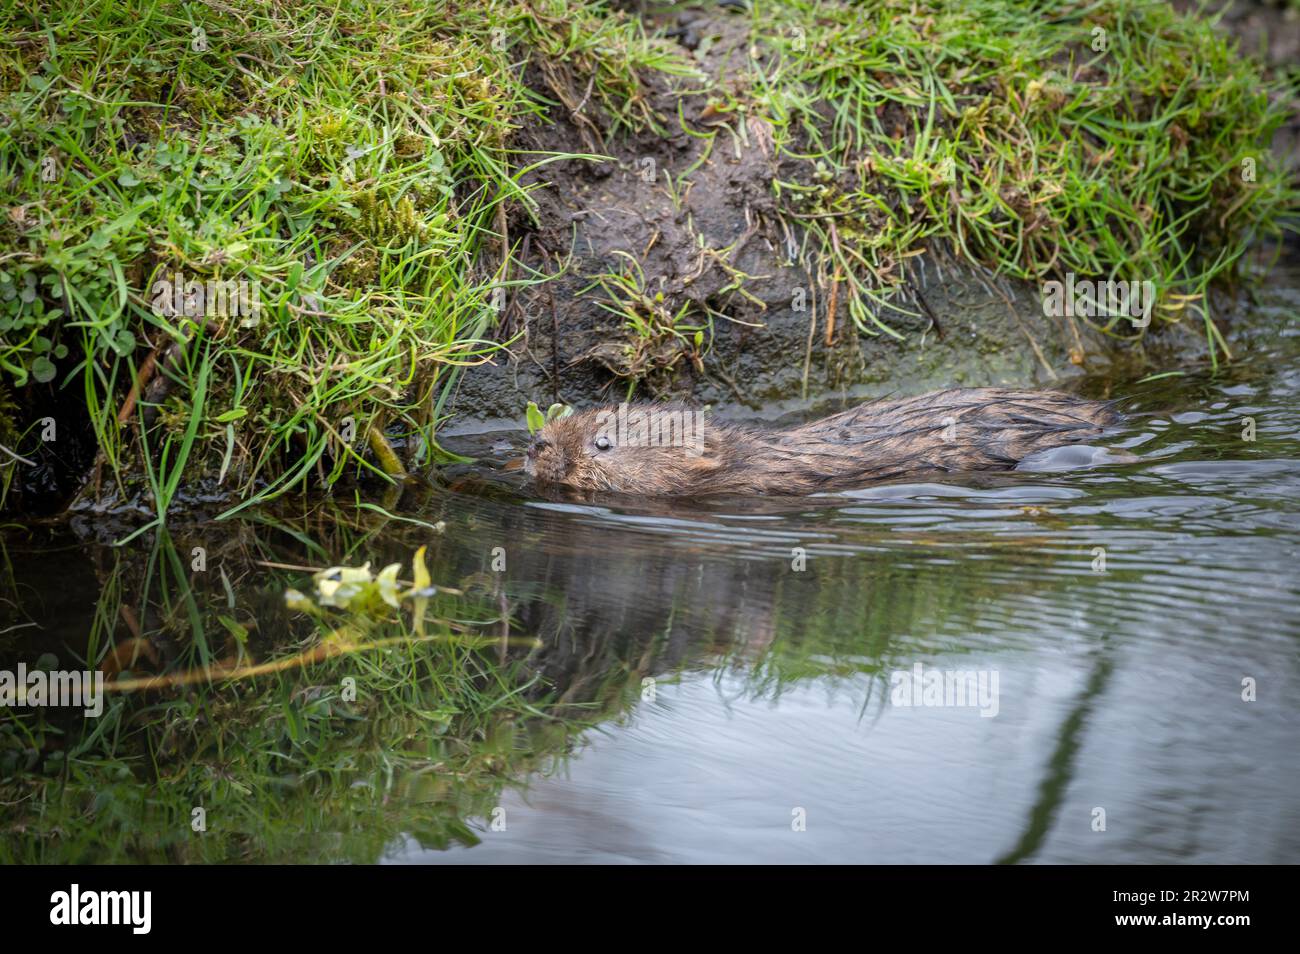 Water vole Swimming in water Stock Photo